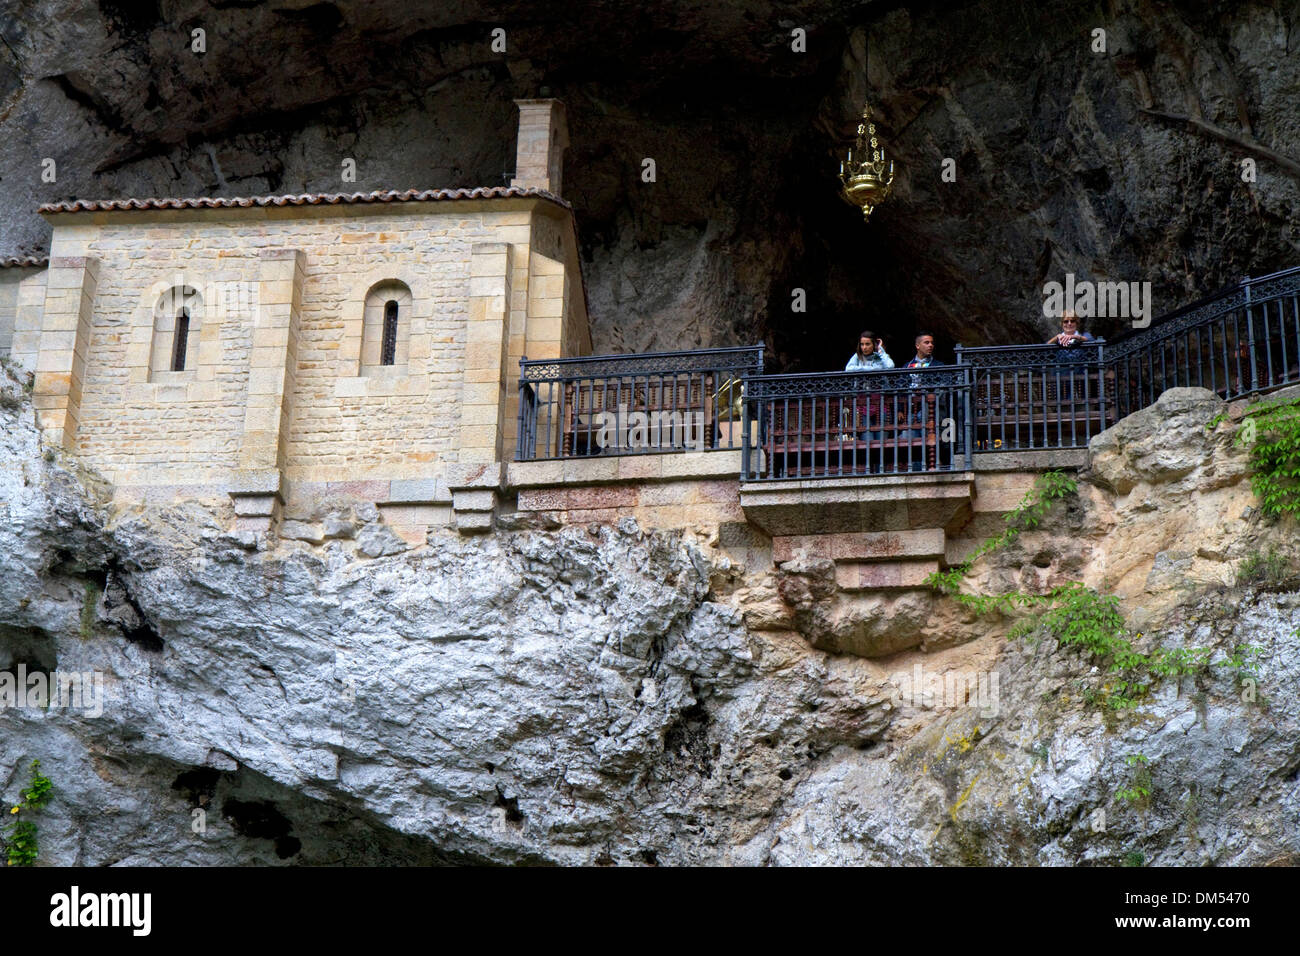 The Holy Cave of Covadonga located in Asturias, northern Spain. Stock Photo